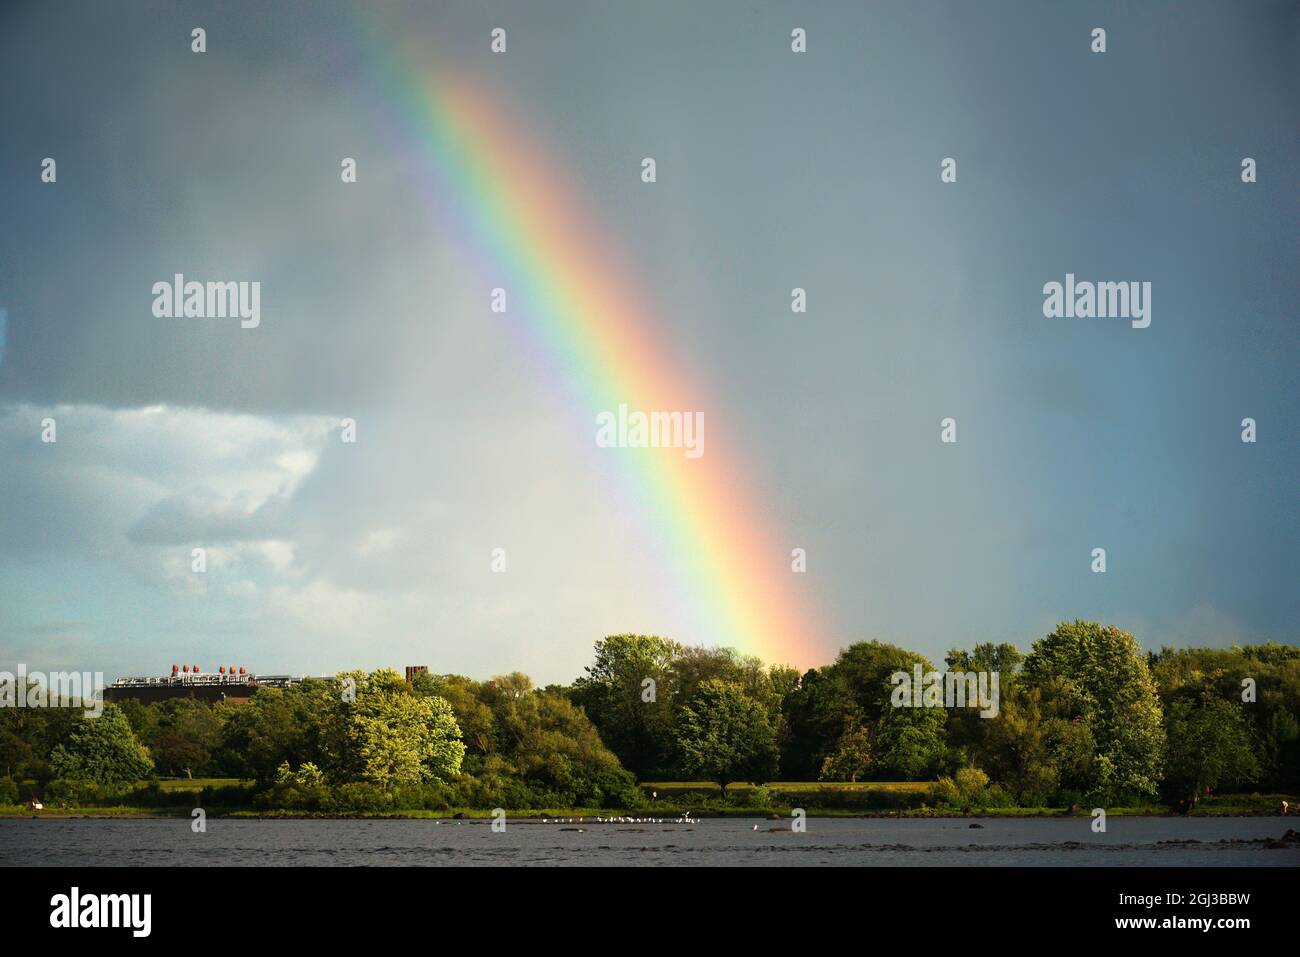 A rainbow in partially cloudy sky with green trees in the background Stock Photo